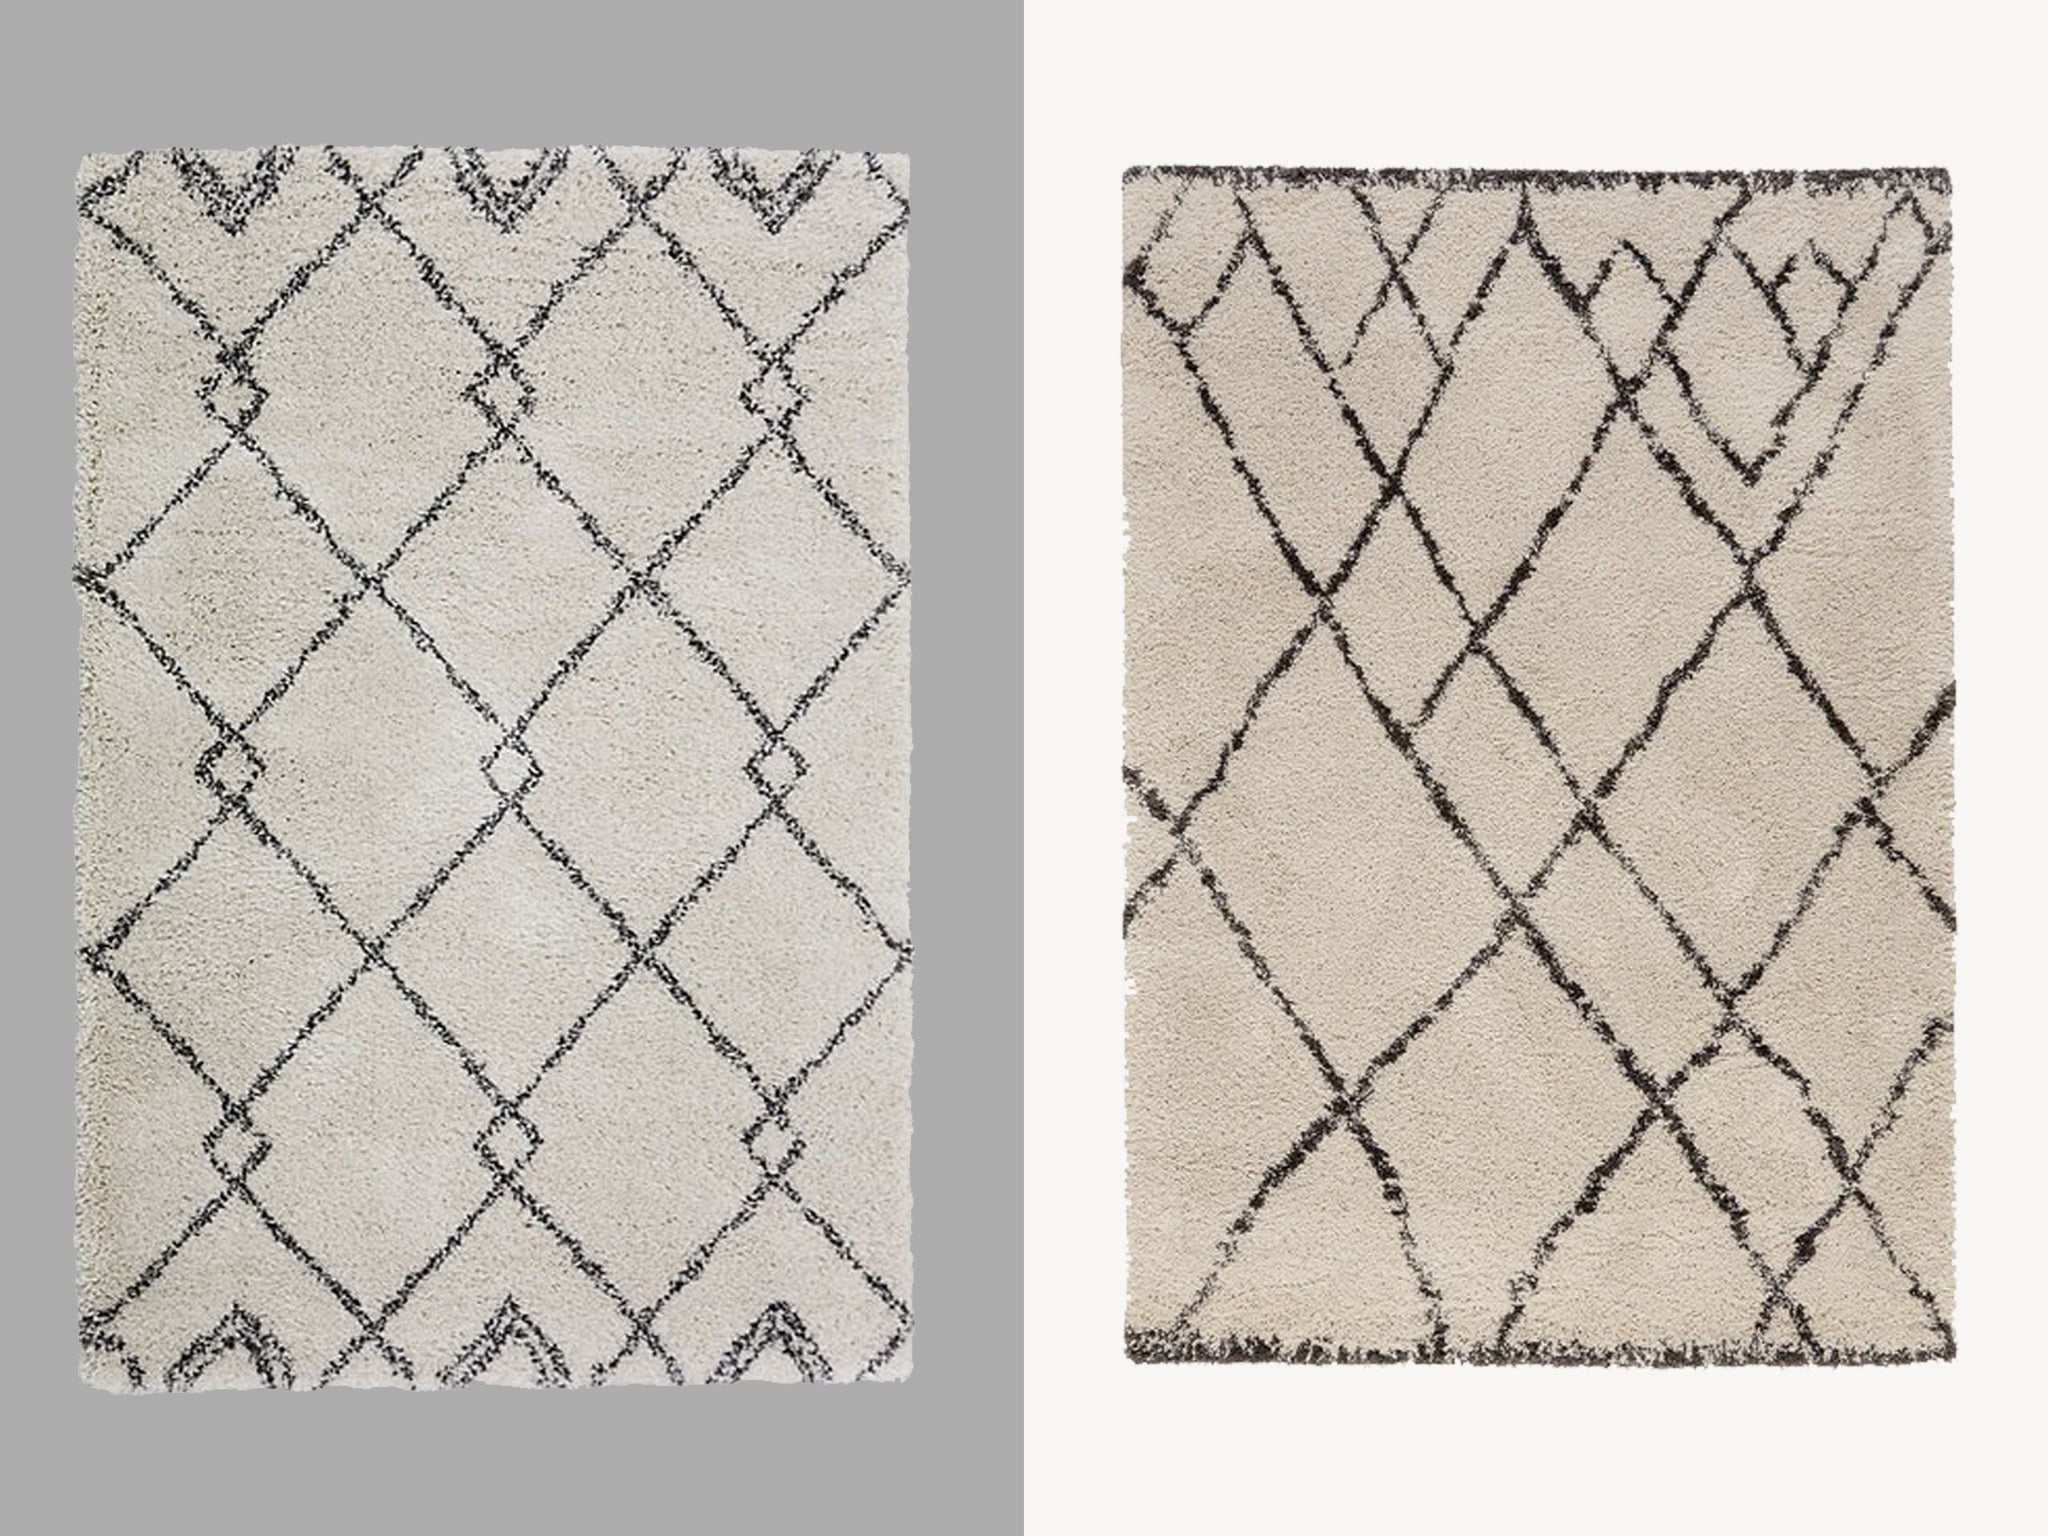 Asda’s rug on the left, and La Redoute’s version on the right